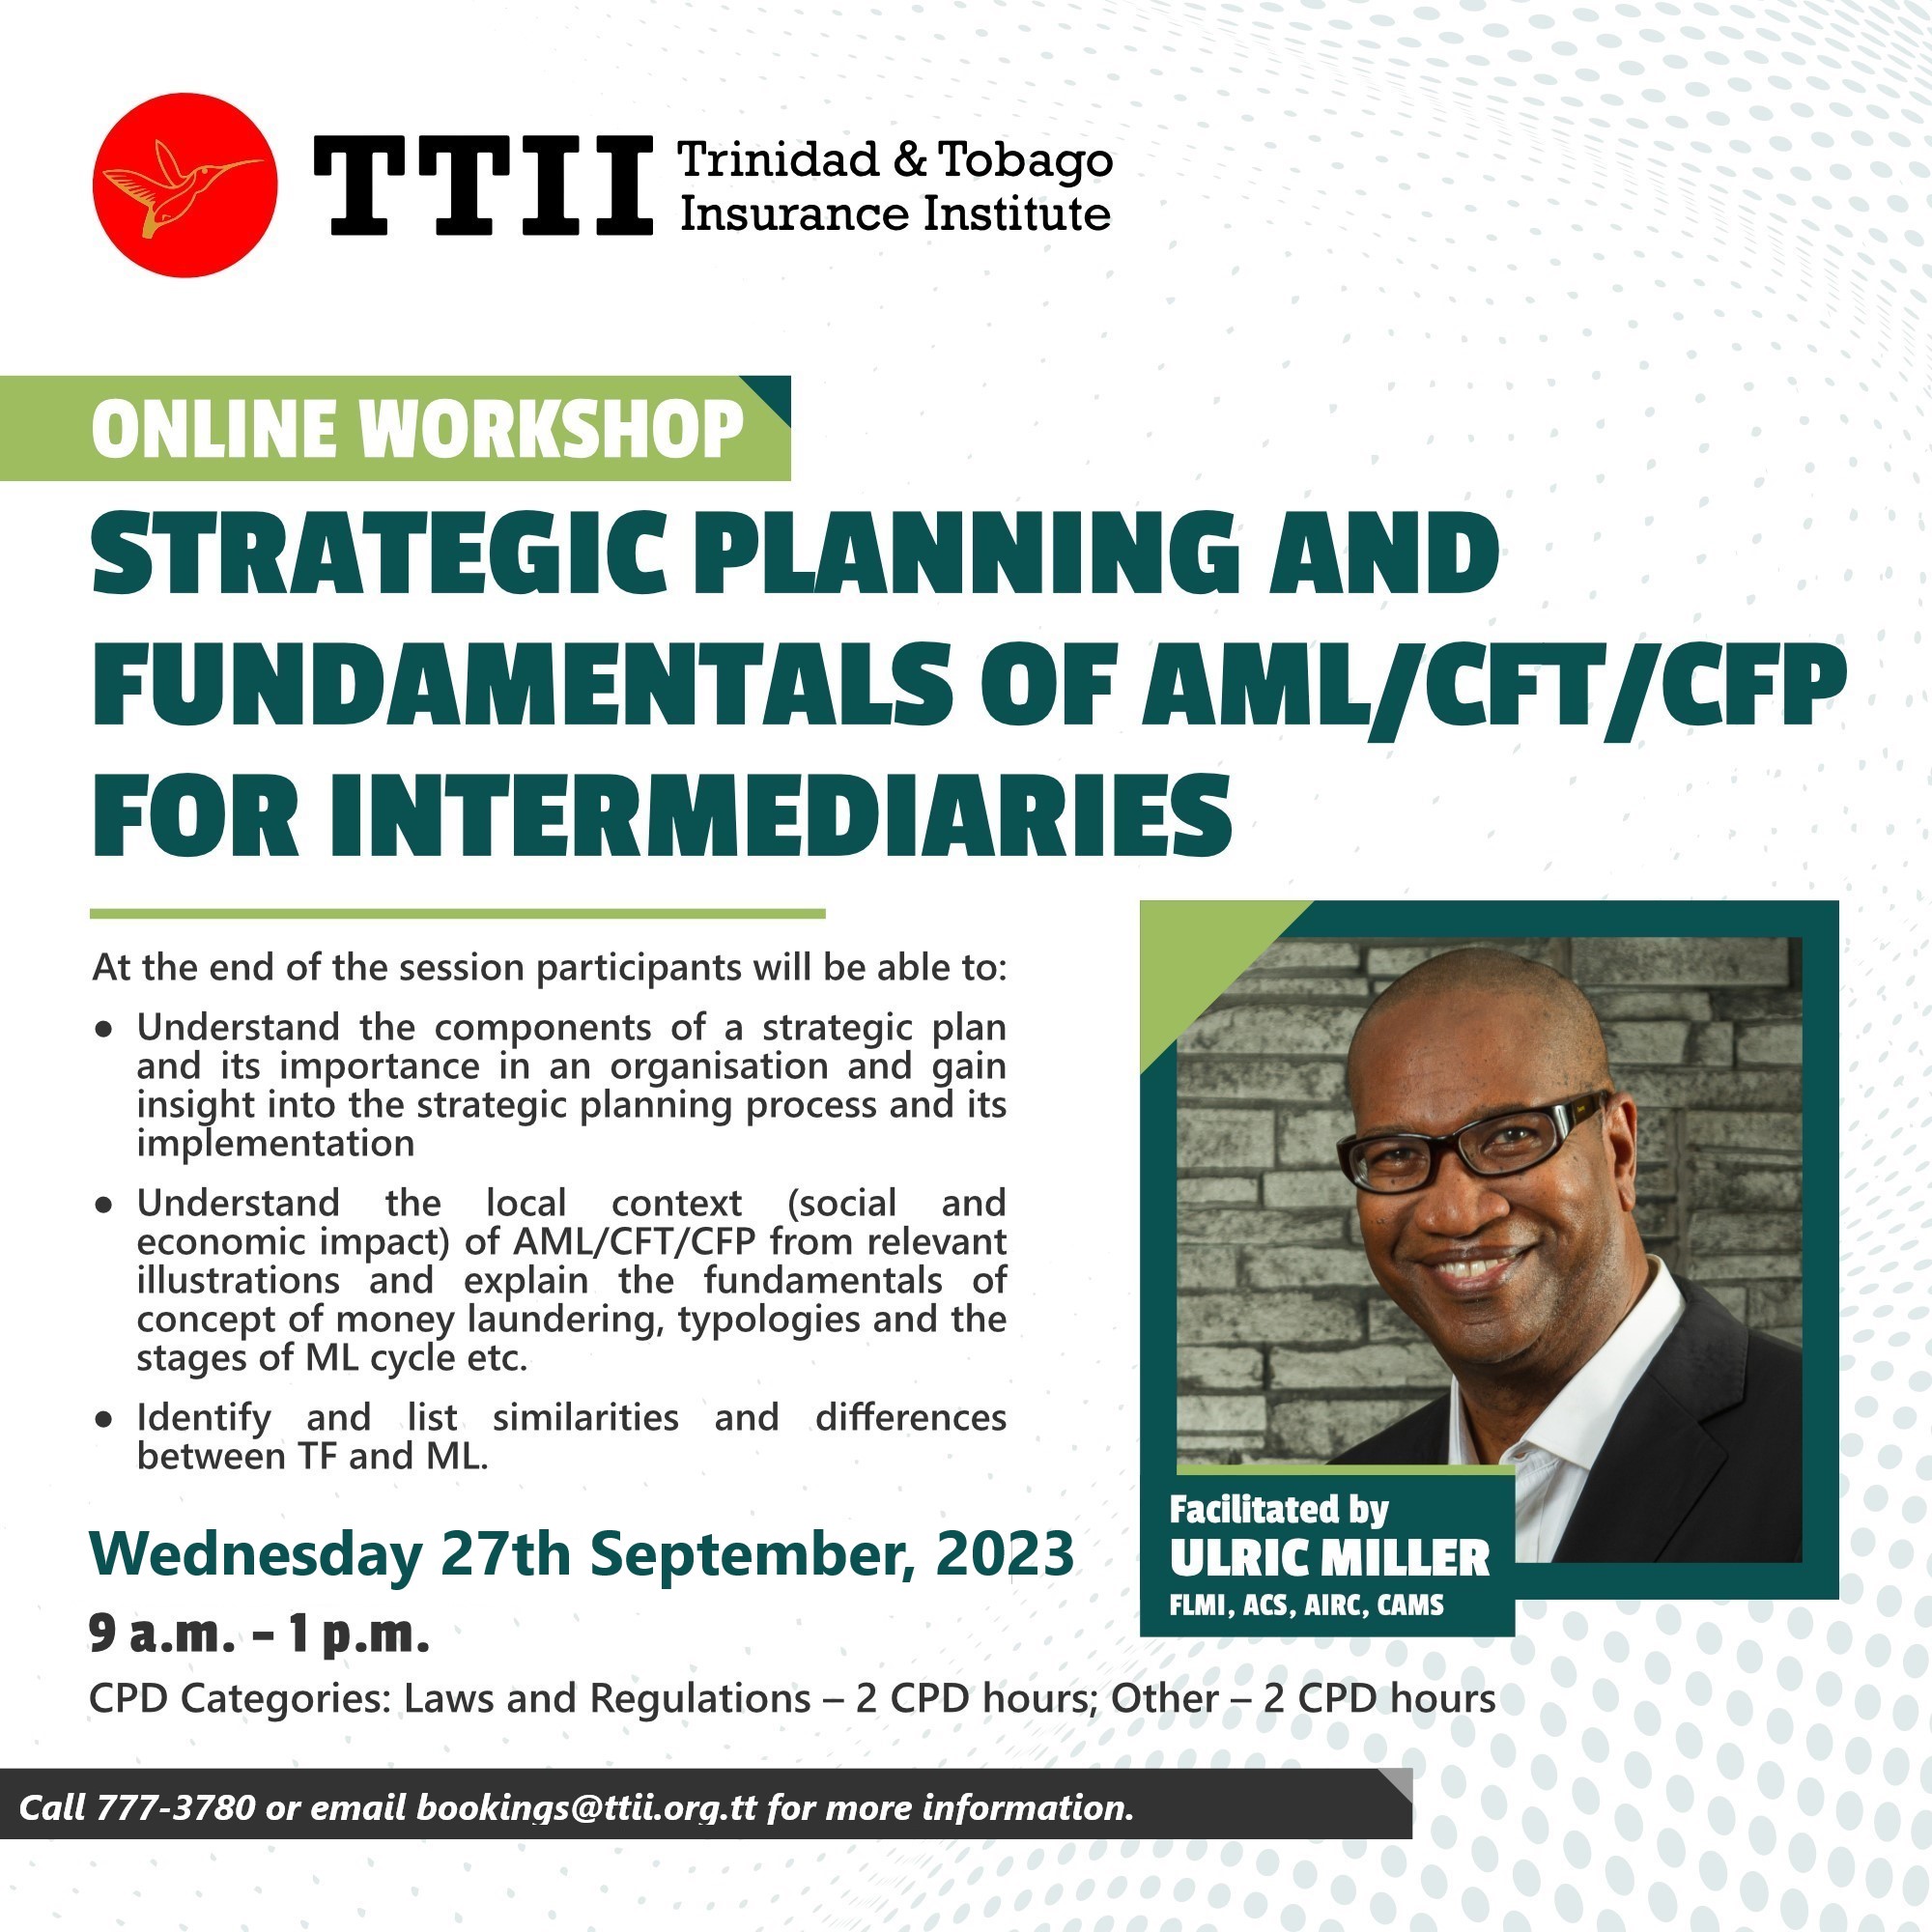 Strategic Planning and Fundamentals of AML/CFT/CFP for Intermediaries